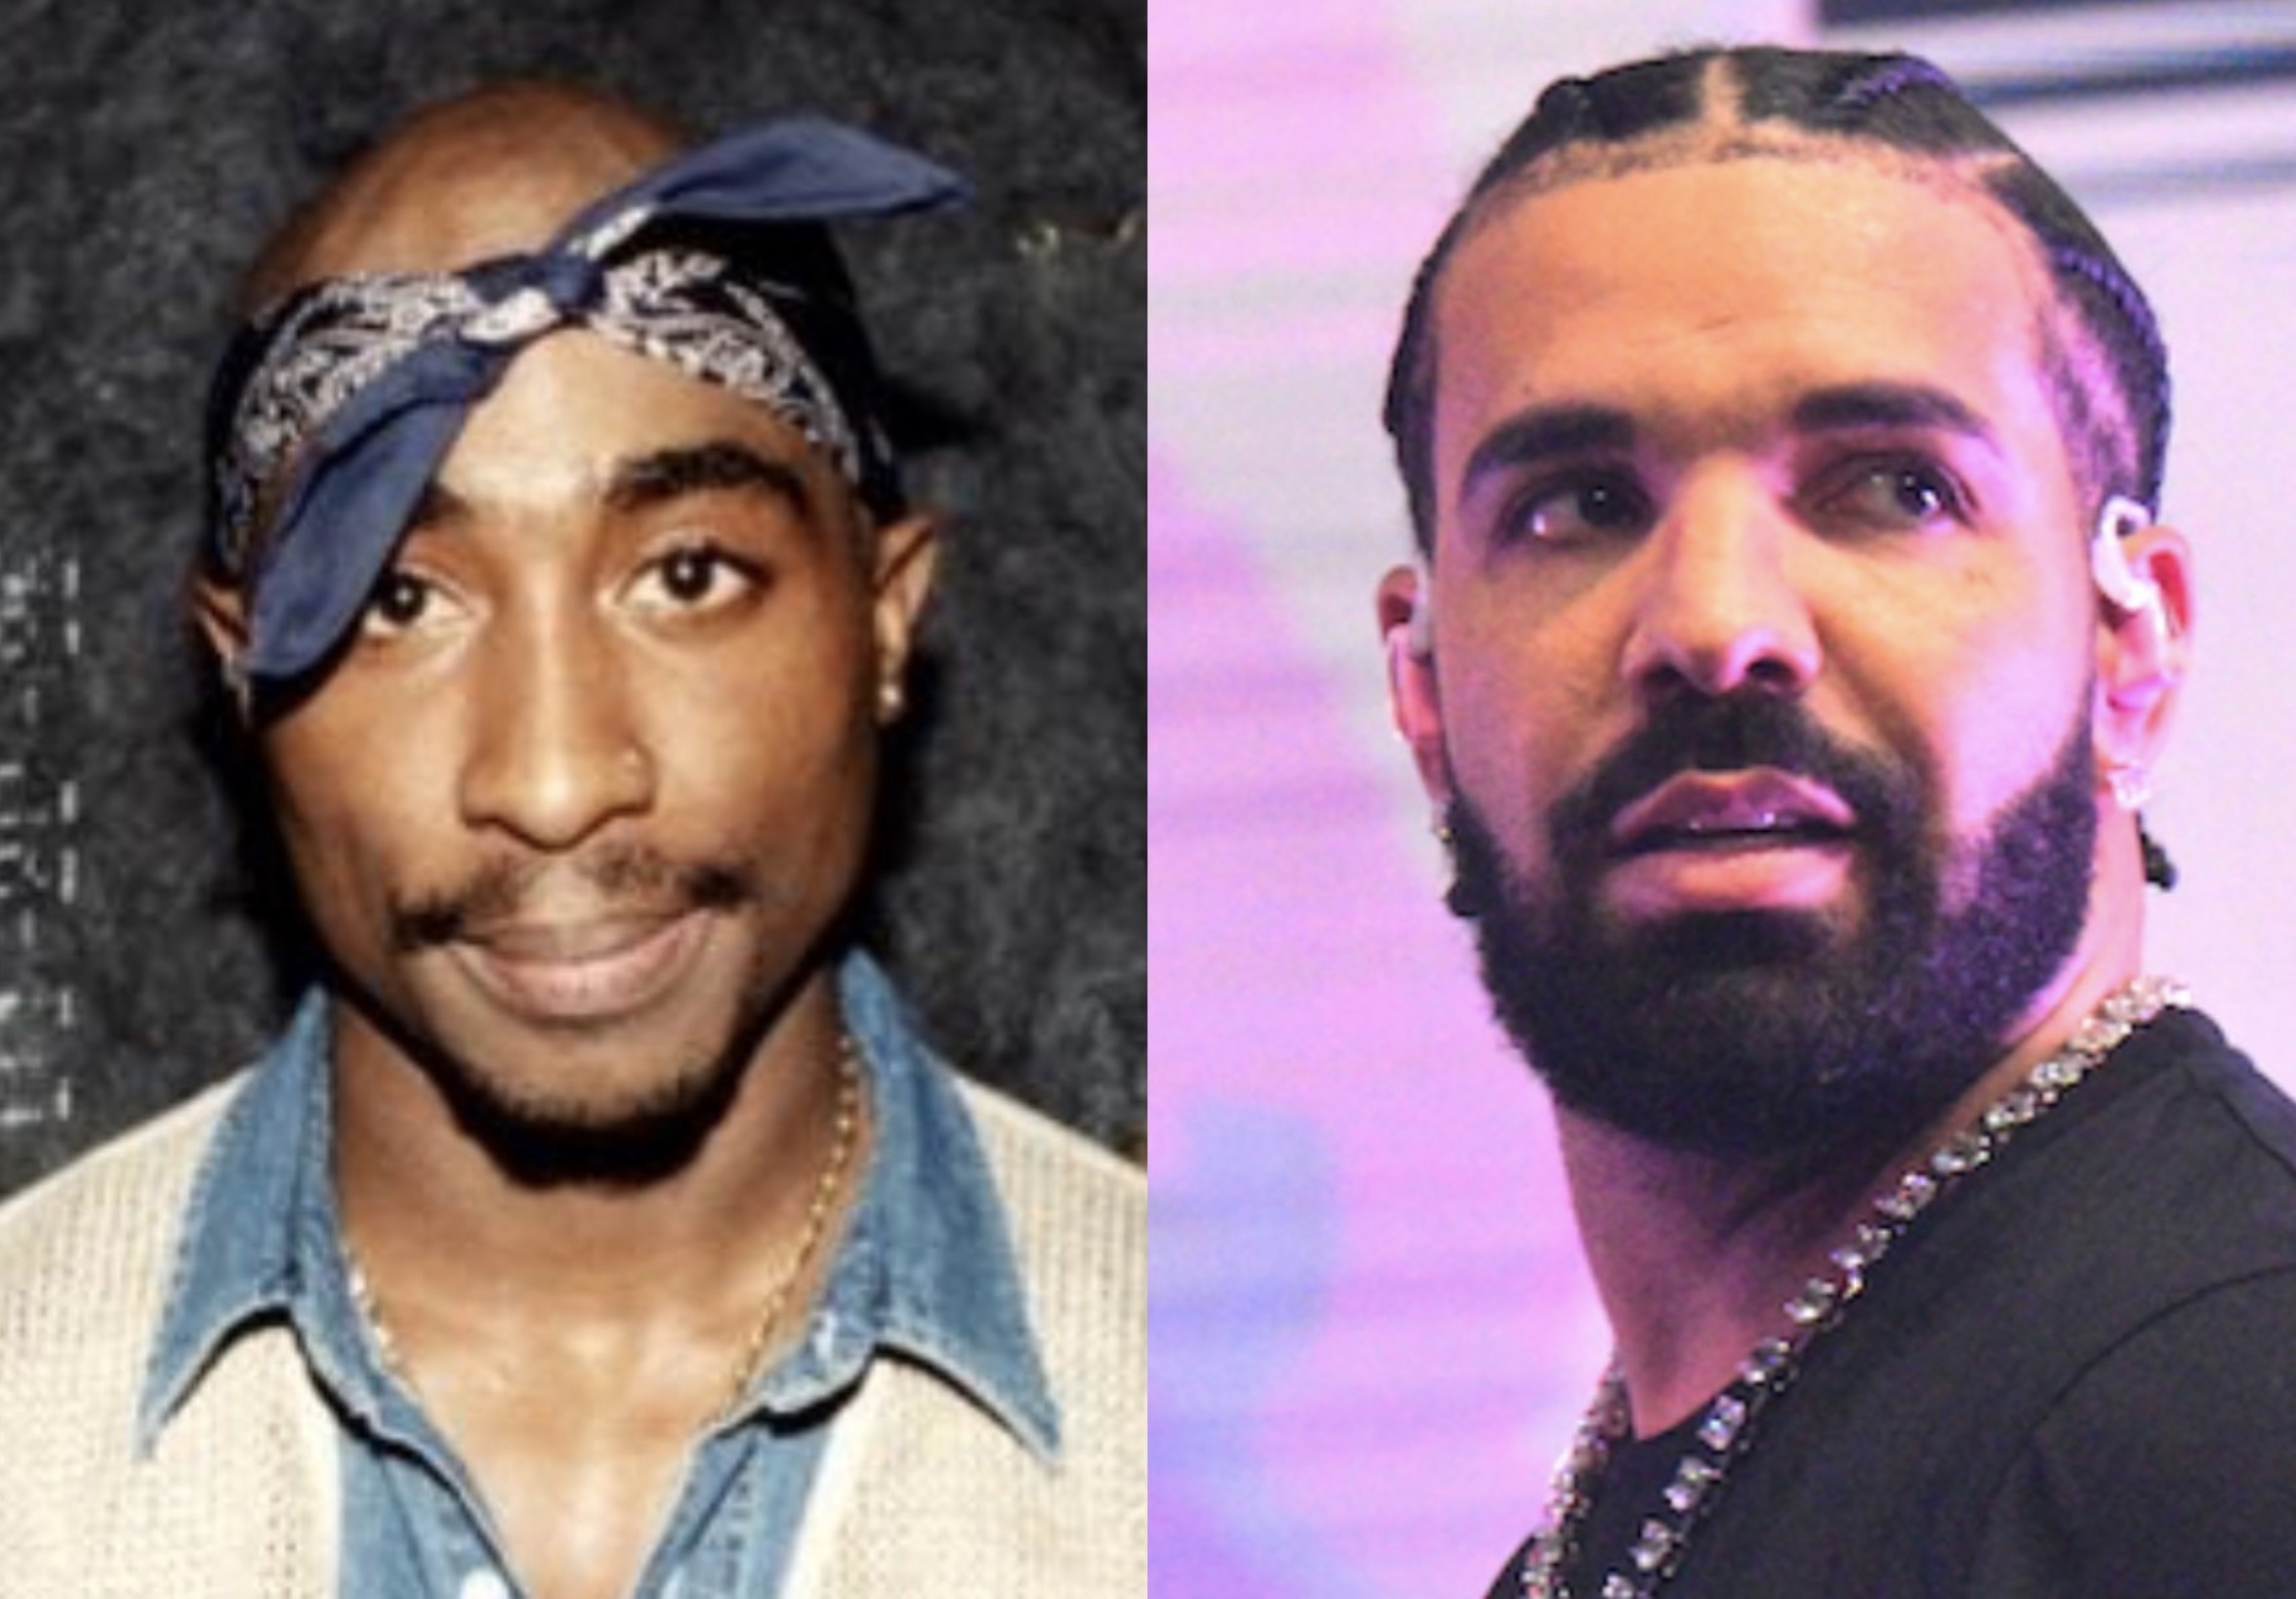 2Pac’s Estate Threatens To Sue Drake & Says Kendrick Lamar Is A Friend To The Estate #KendrickLamar